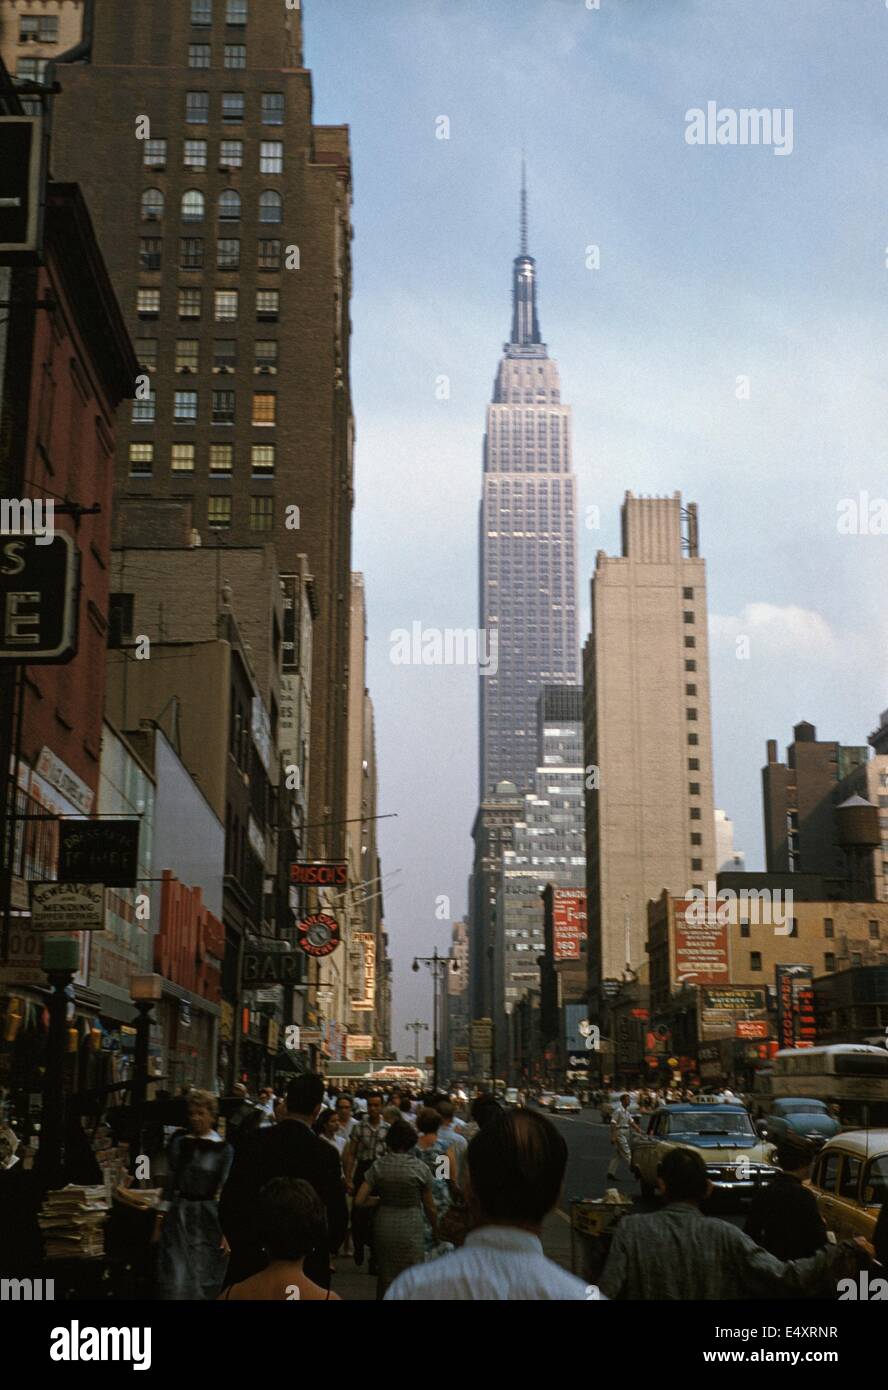 Street scene New York City, crowded sidewalk, Empire State Building in background, 1958 Stock Photo